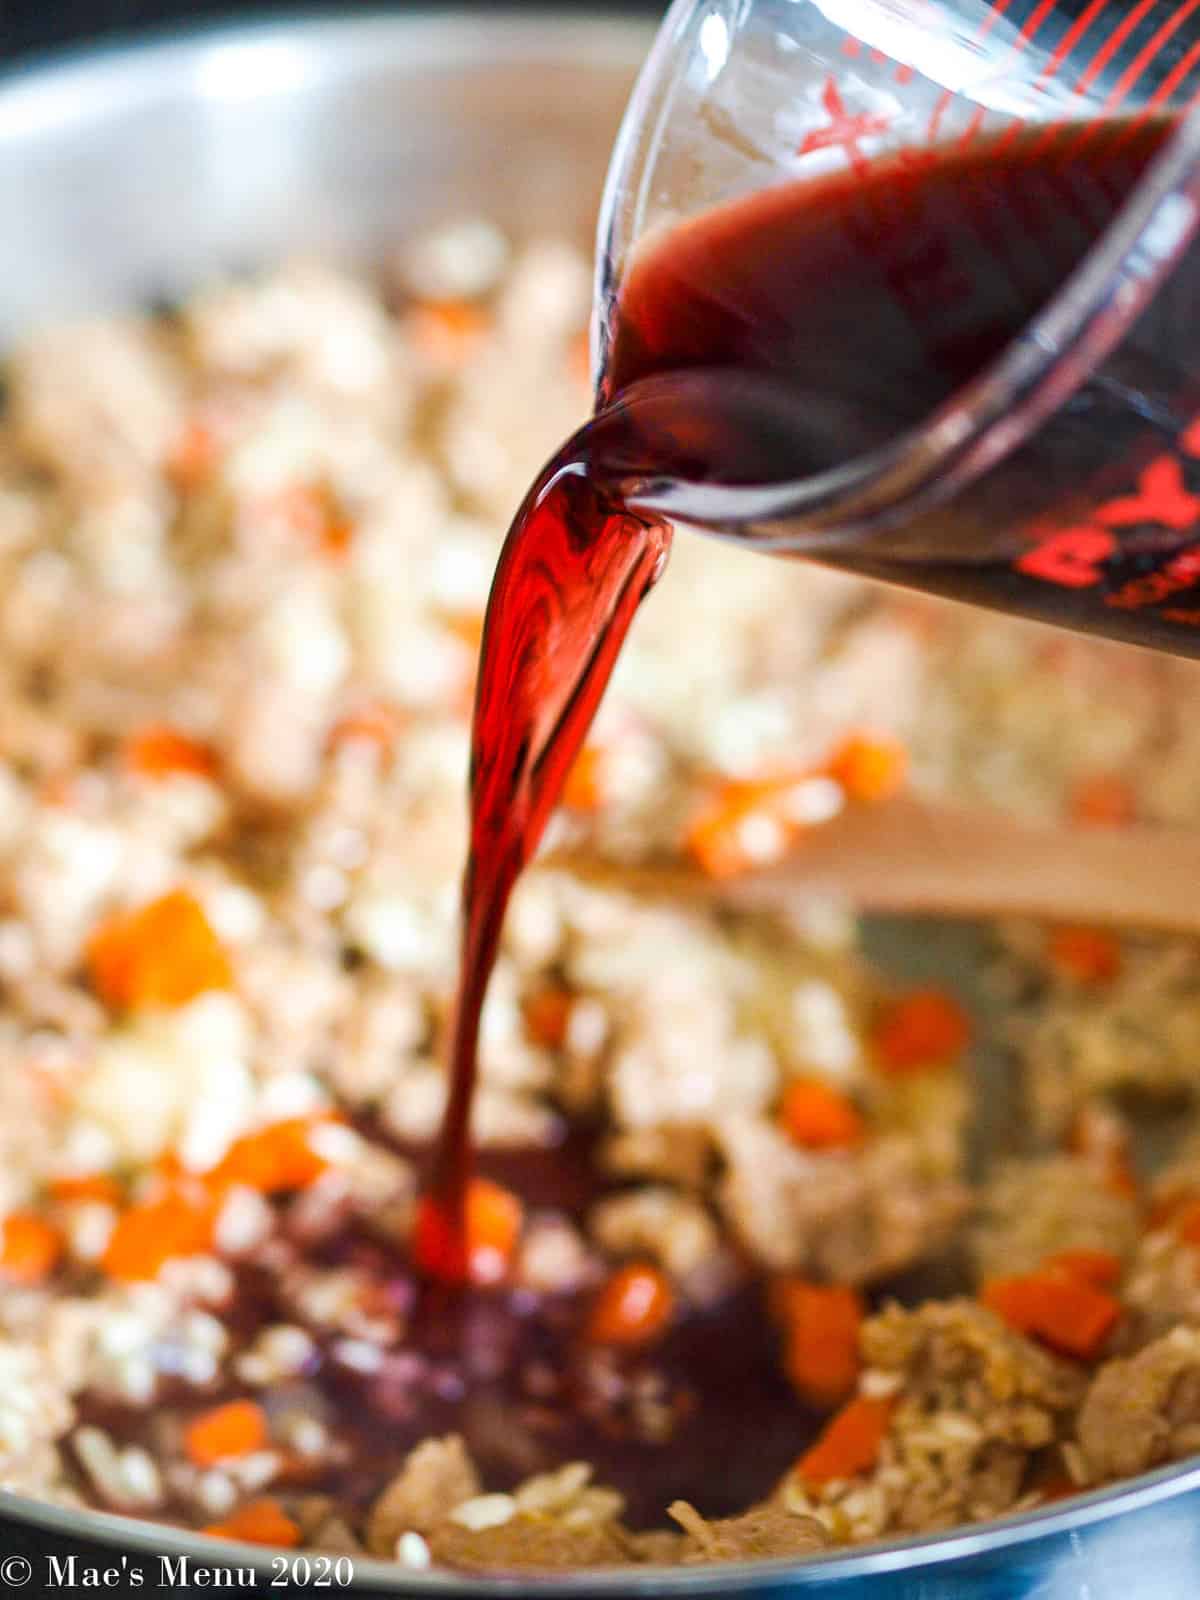 Pouring red wine into the pan of rice, meat, and vegetables